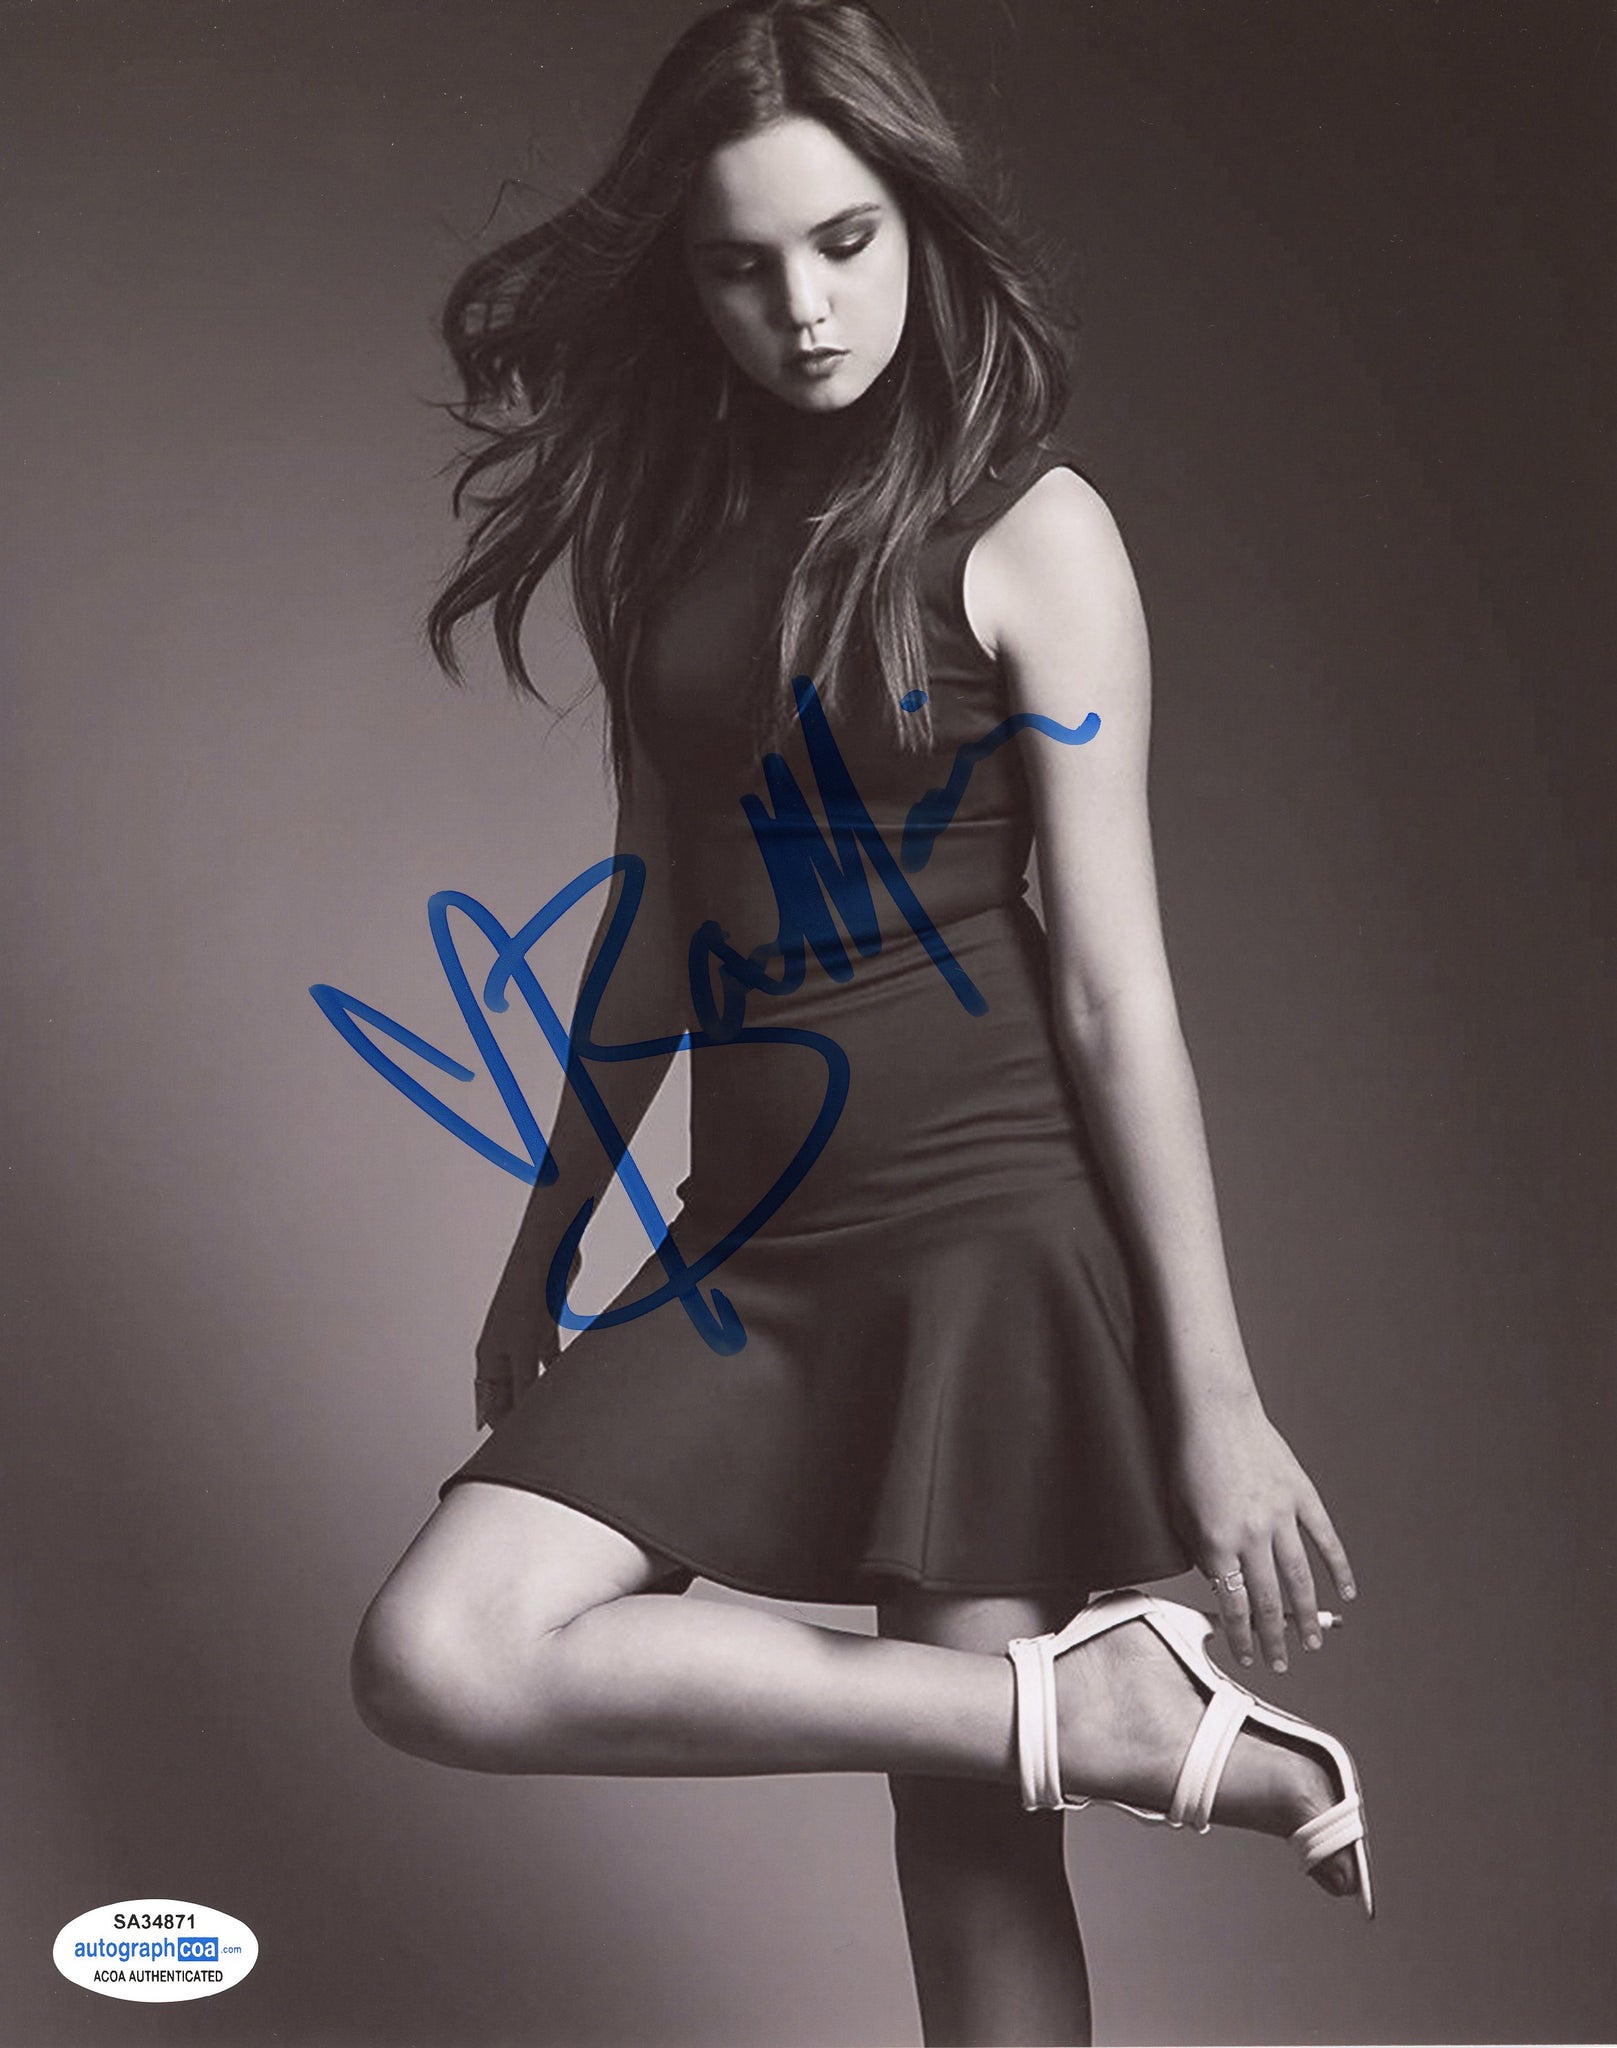 Bailee Madison Sexy Signed Autograph 8x10 Photo ACOA #56 - Outlaw Hobbies Authentic Autographs